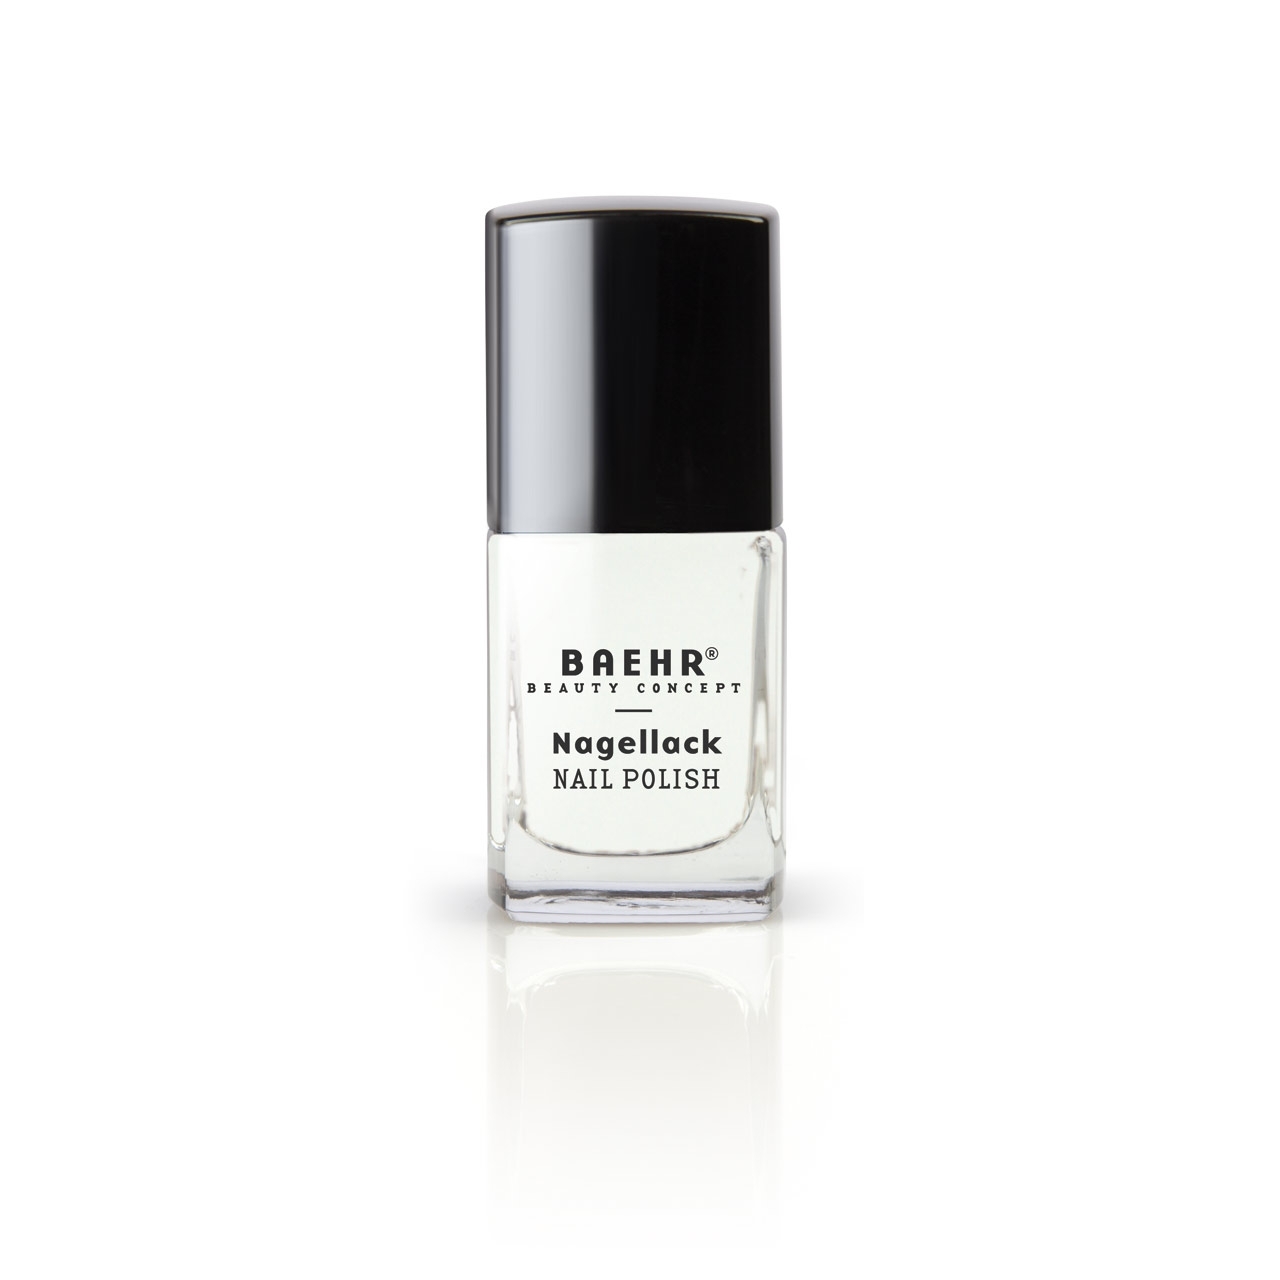 BAEHR BEAUTY CONCEPT - NAILS Nagellack weiß french 11 ml